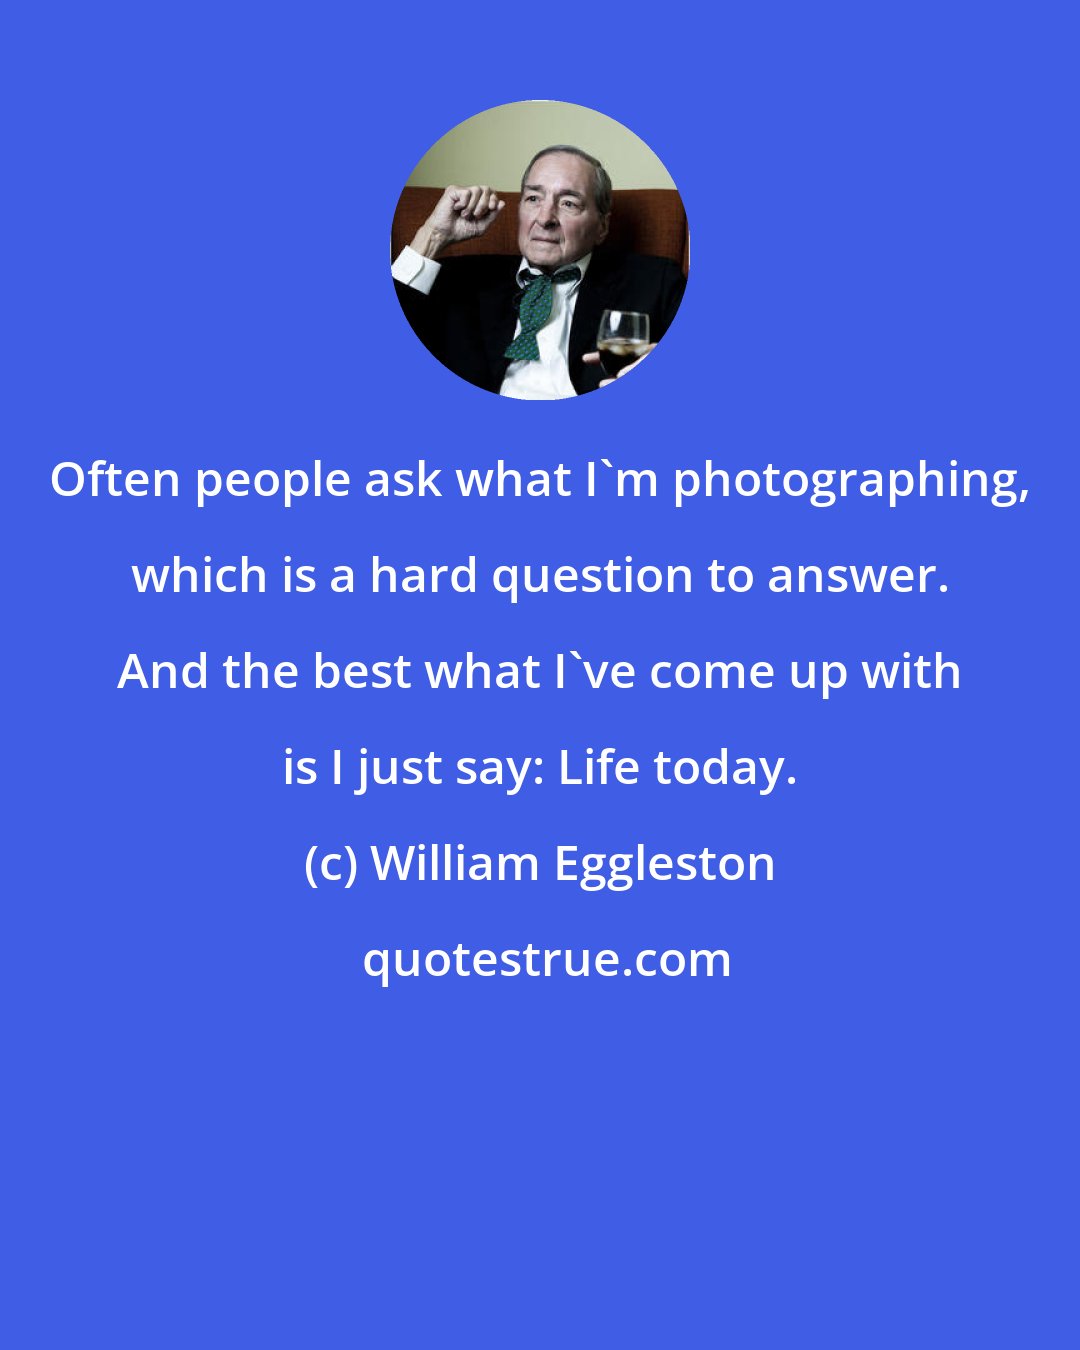 William Eggleston: Often people ask what I'm photographing, which is a hard question to answer. And the best what I've come up with is I just say: Life today.